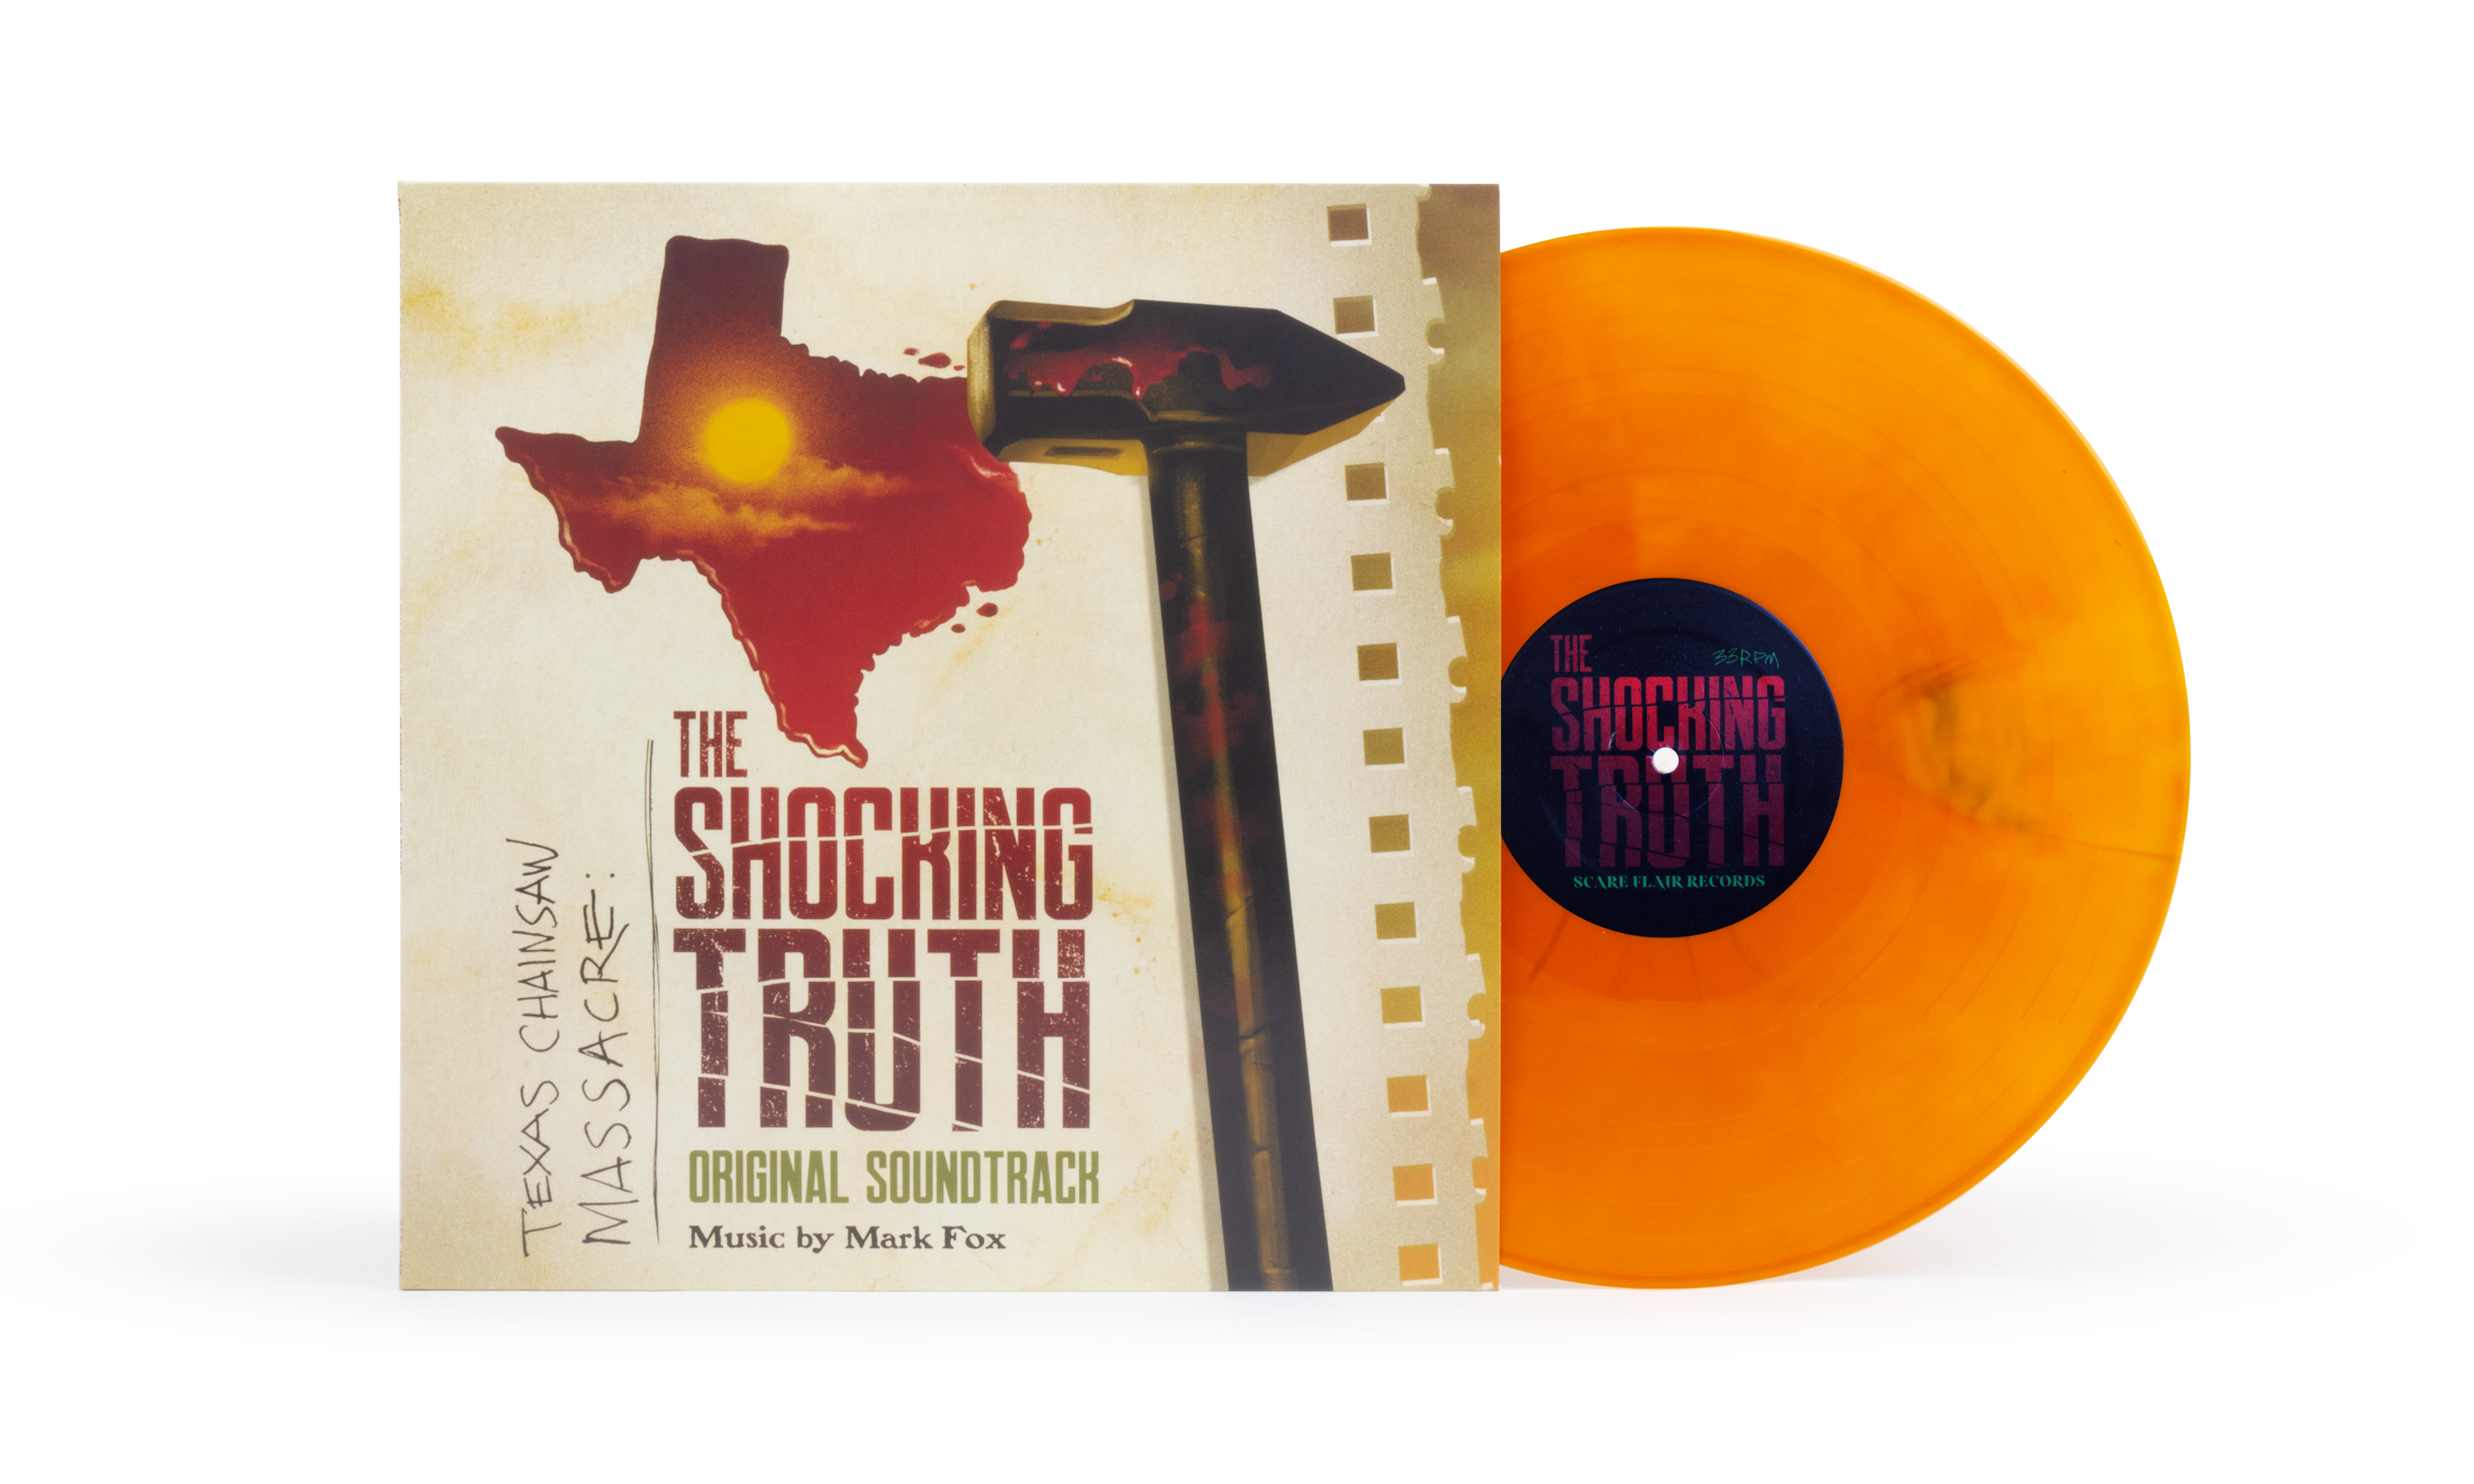 Truth　Original　The　The　Score　Motion　Texas　Chainsaw　Picture　Massacre:　Shocking　LP